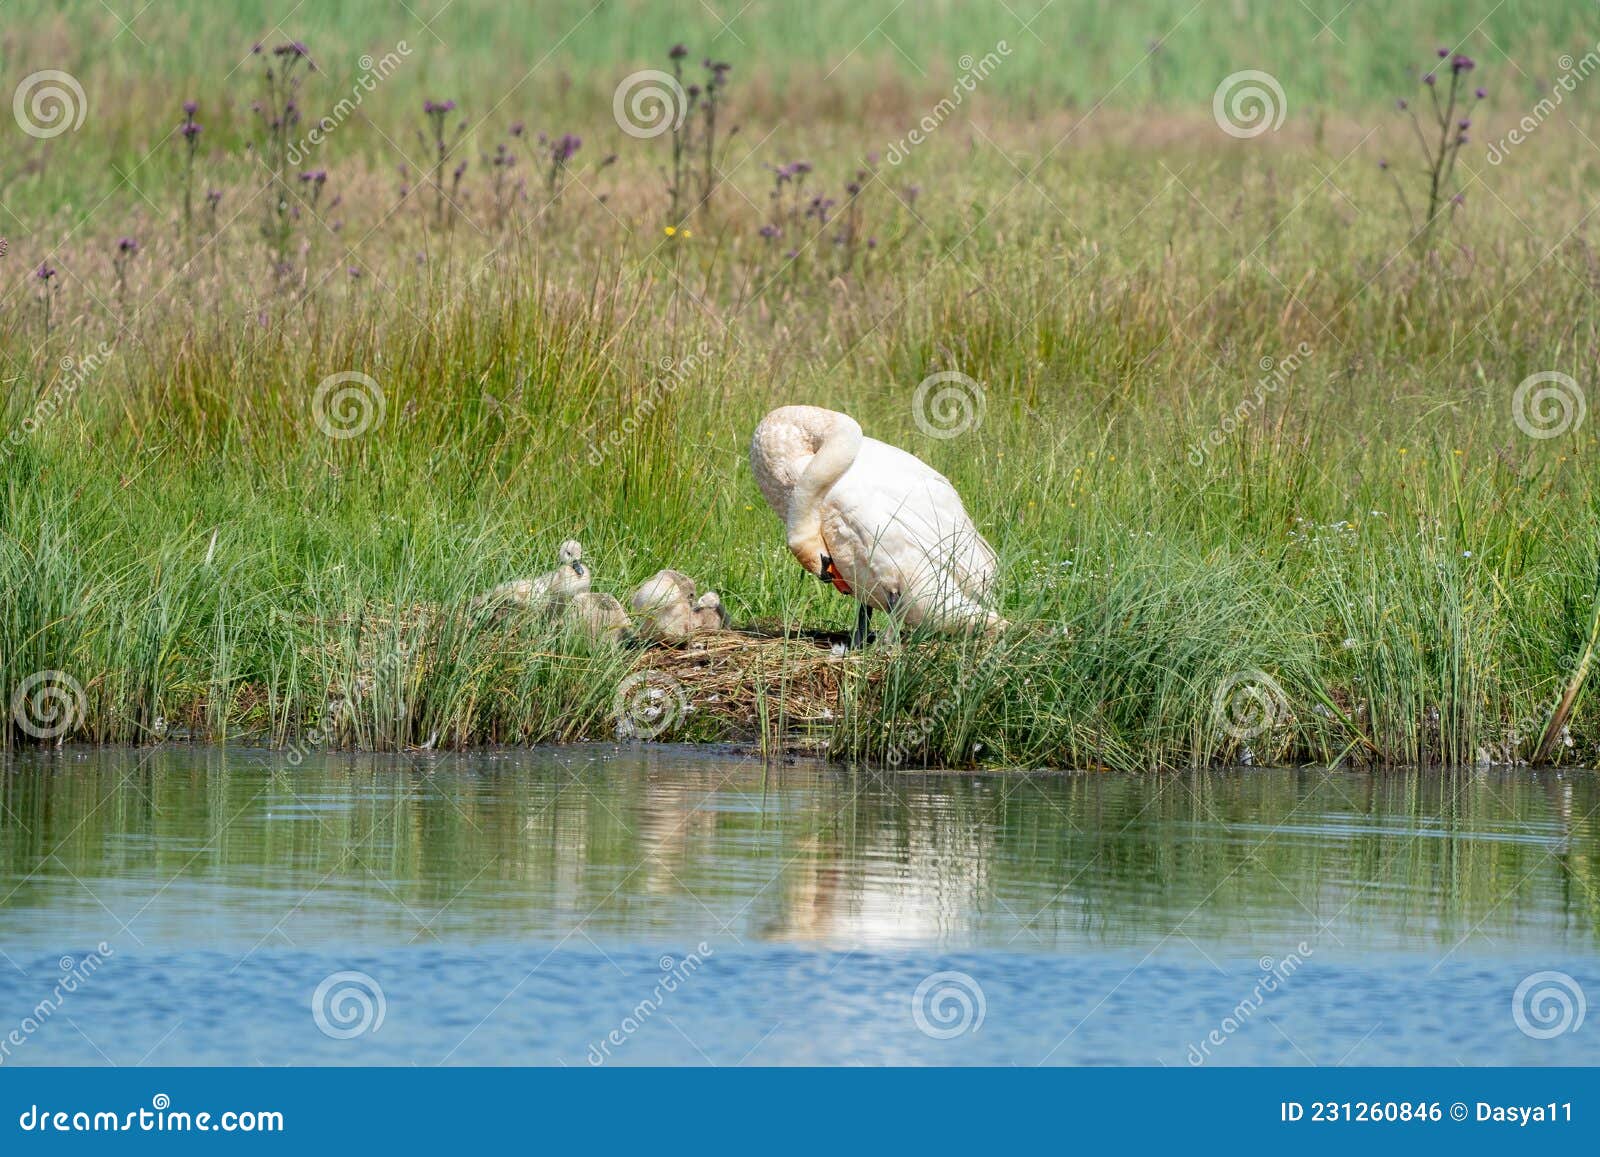 Young Gray Swans in the Grass Along a Lake. Mother Swan Stands Next To ...